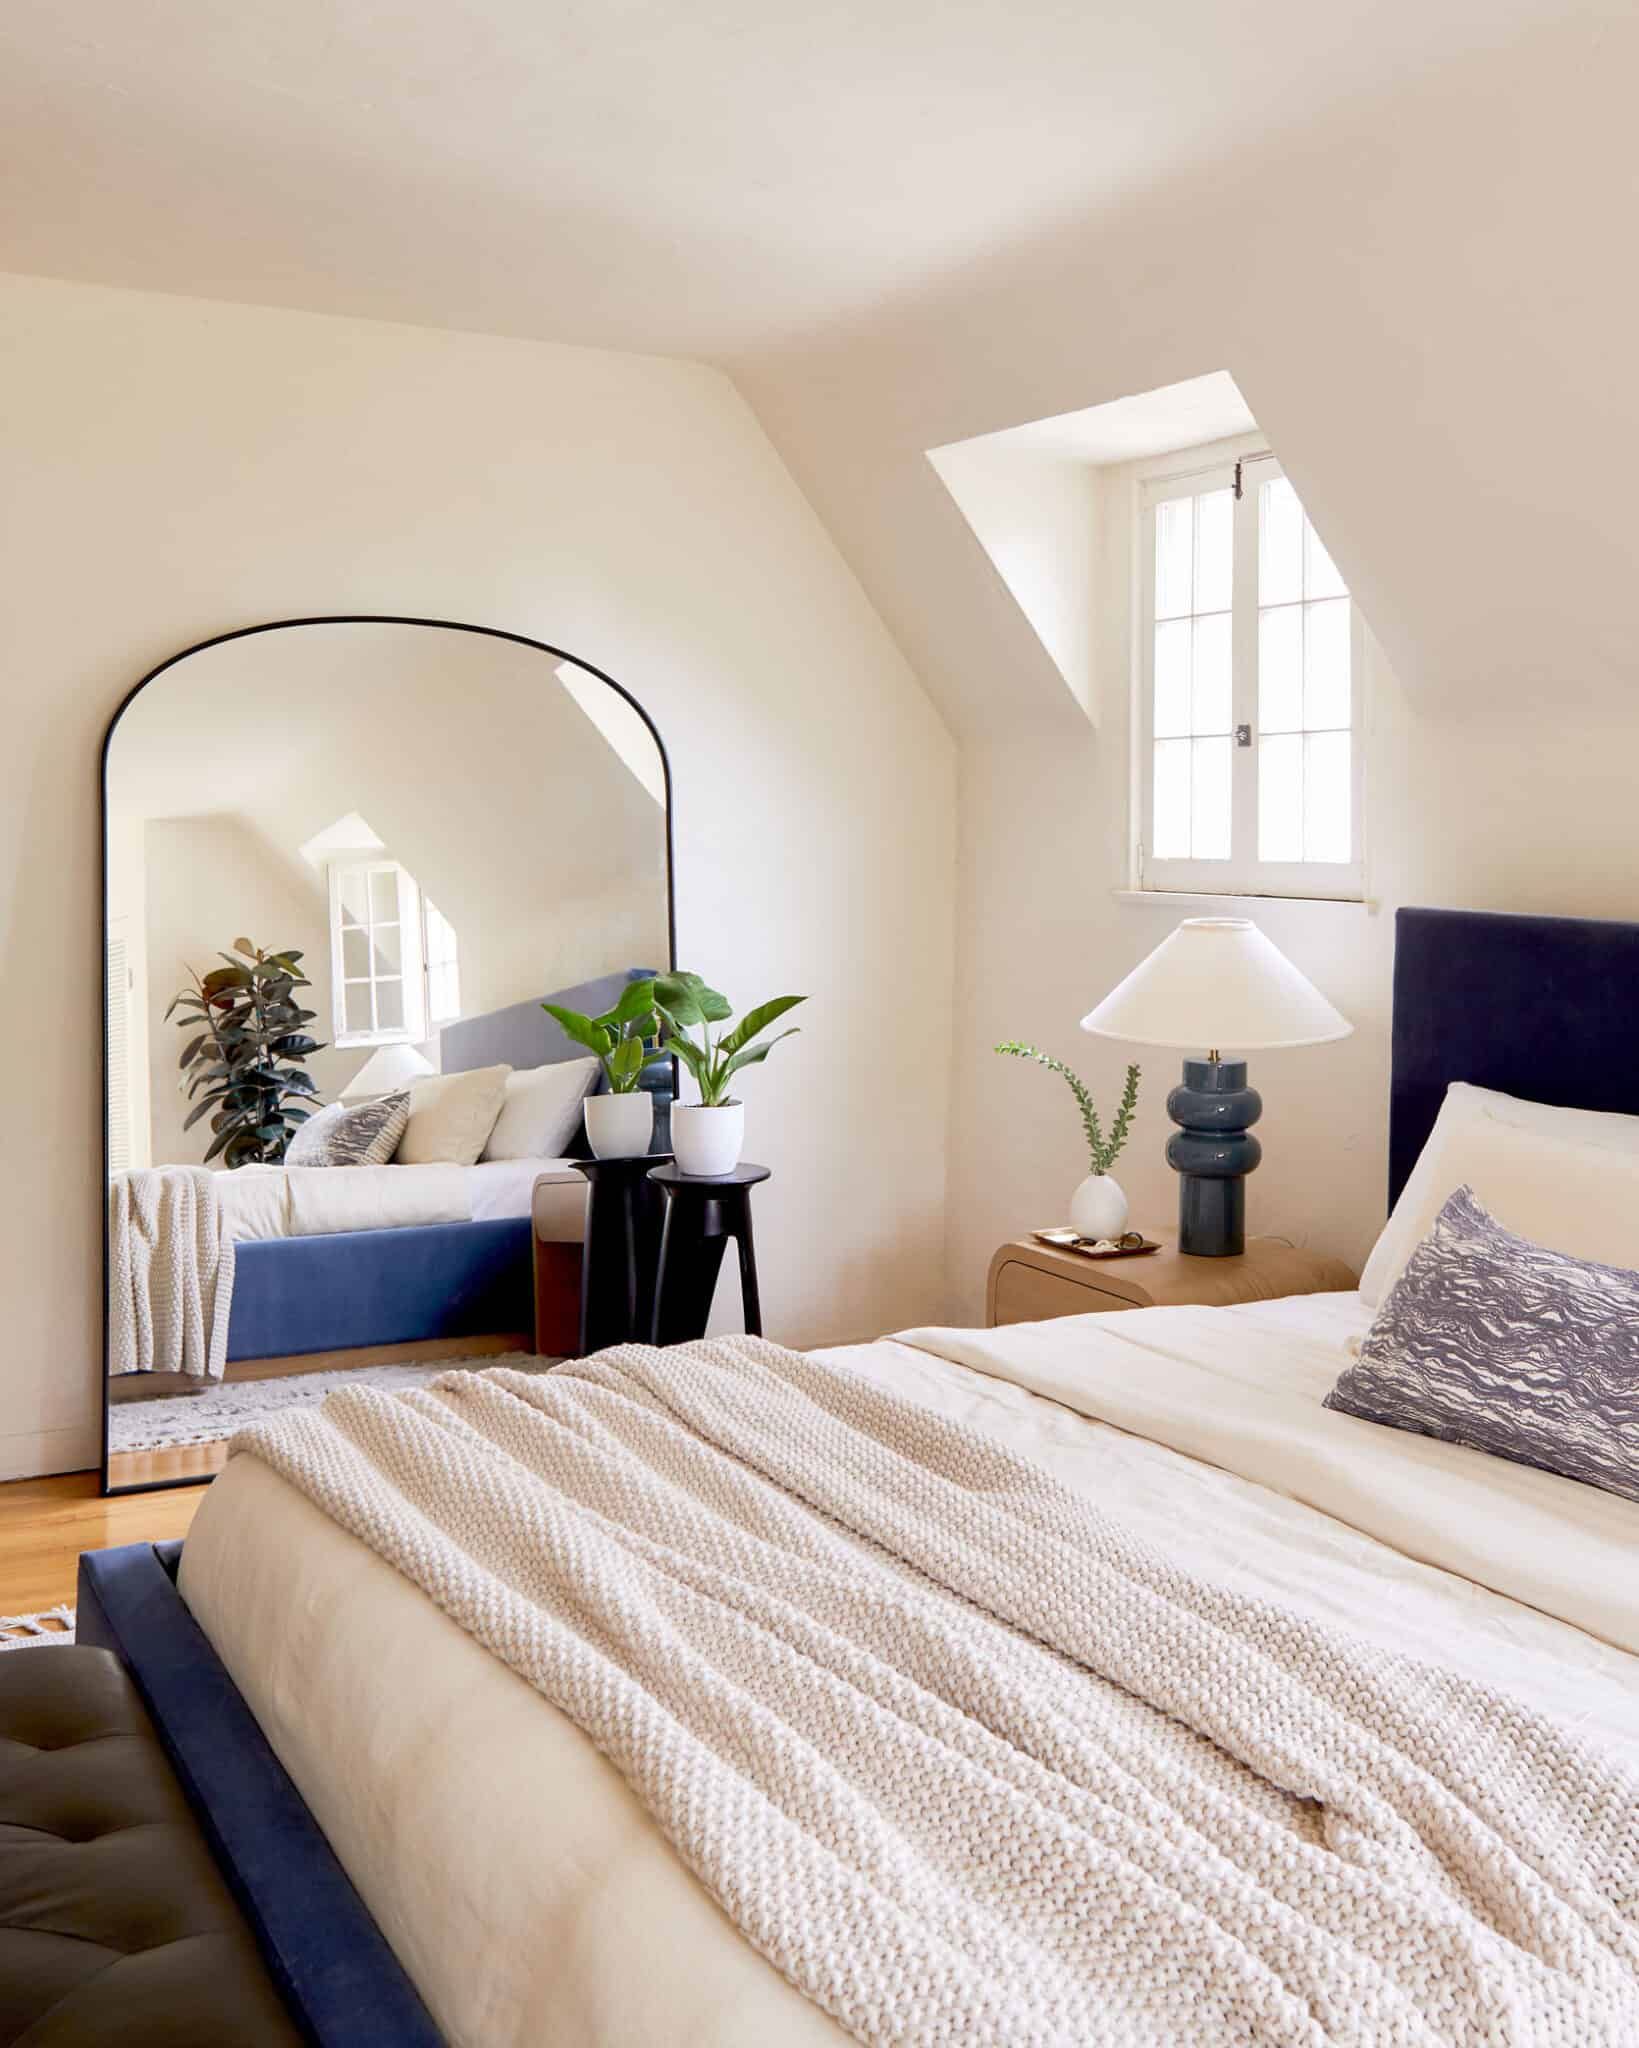 9 Best Mirrors For Bedroom For 2023 1697385814 